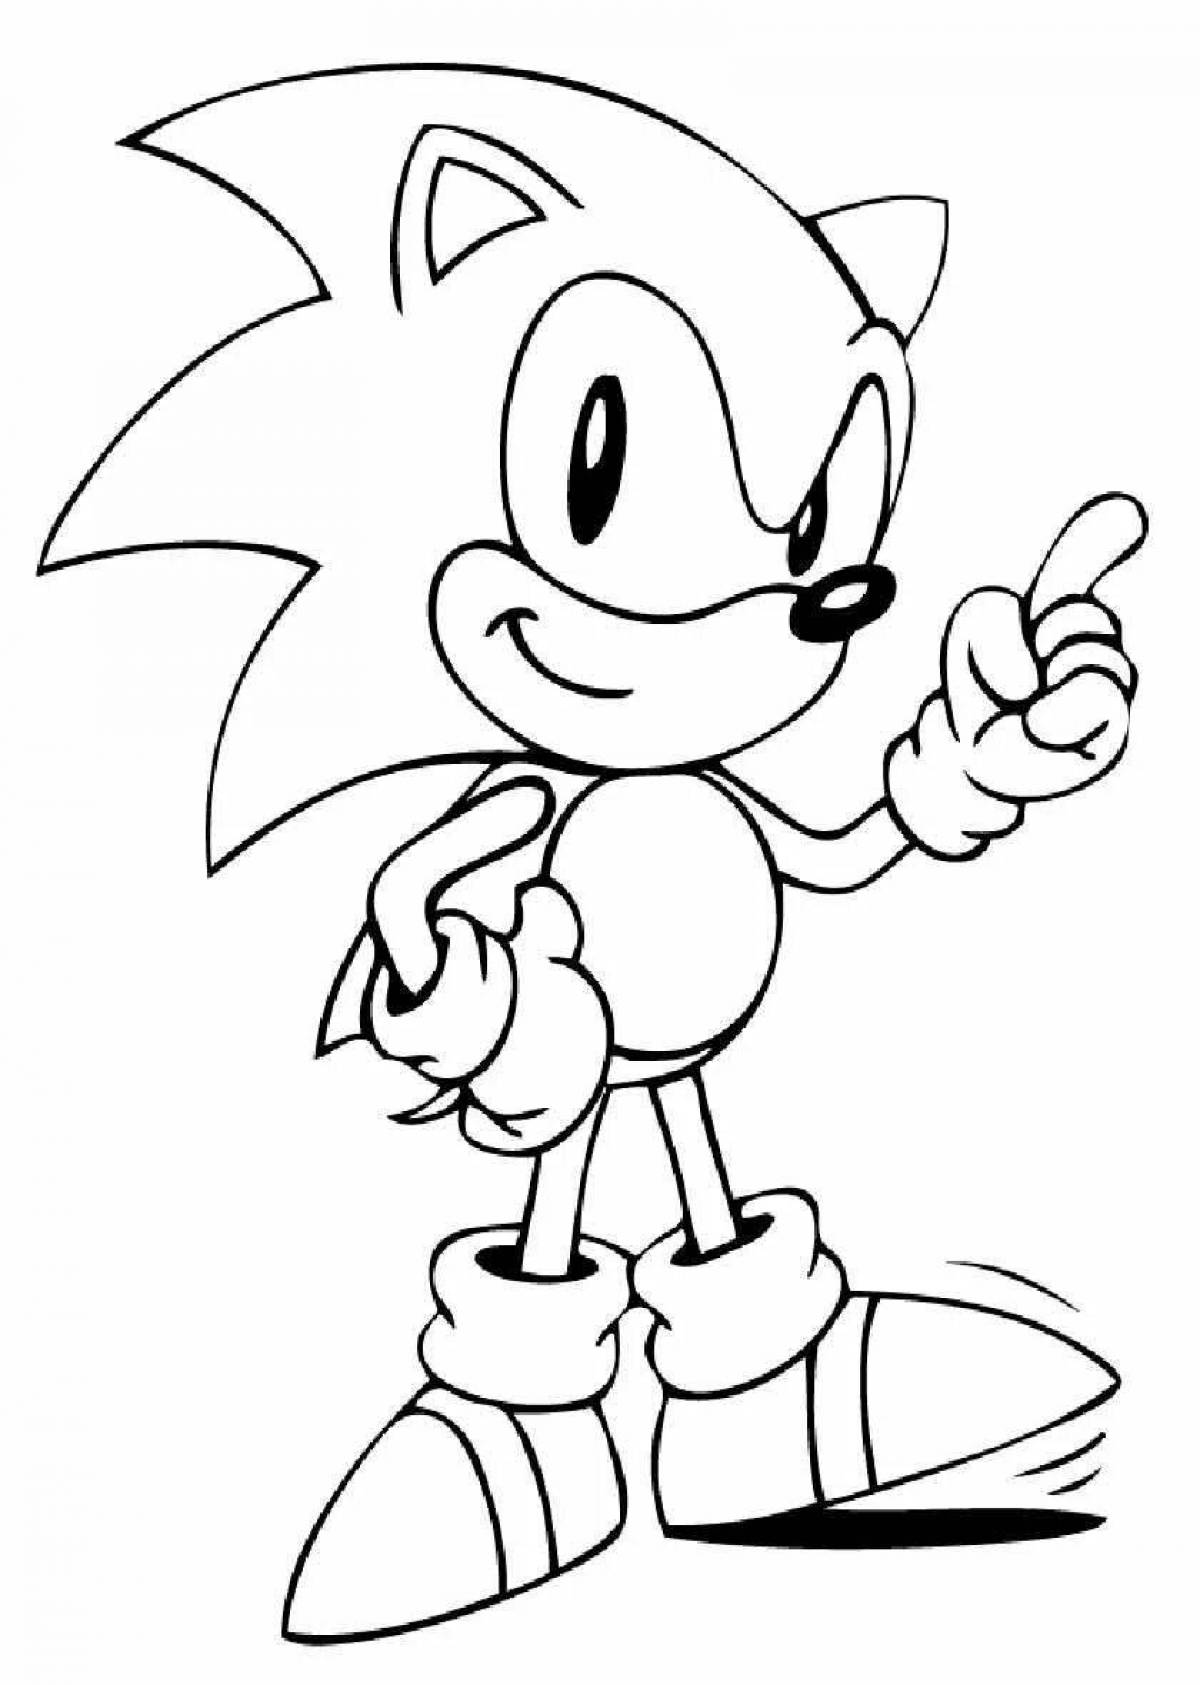 Zany xs sonic coloring page